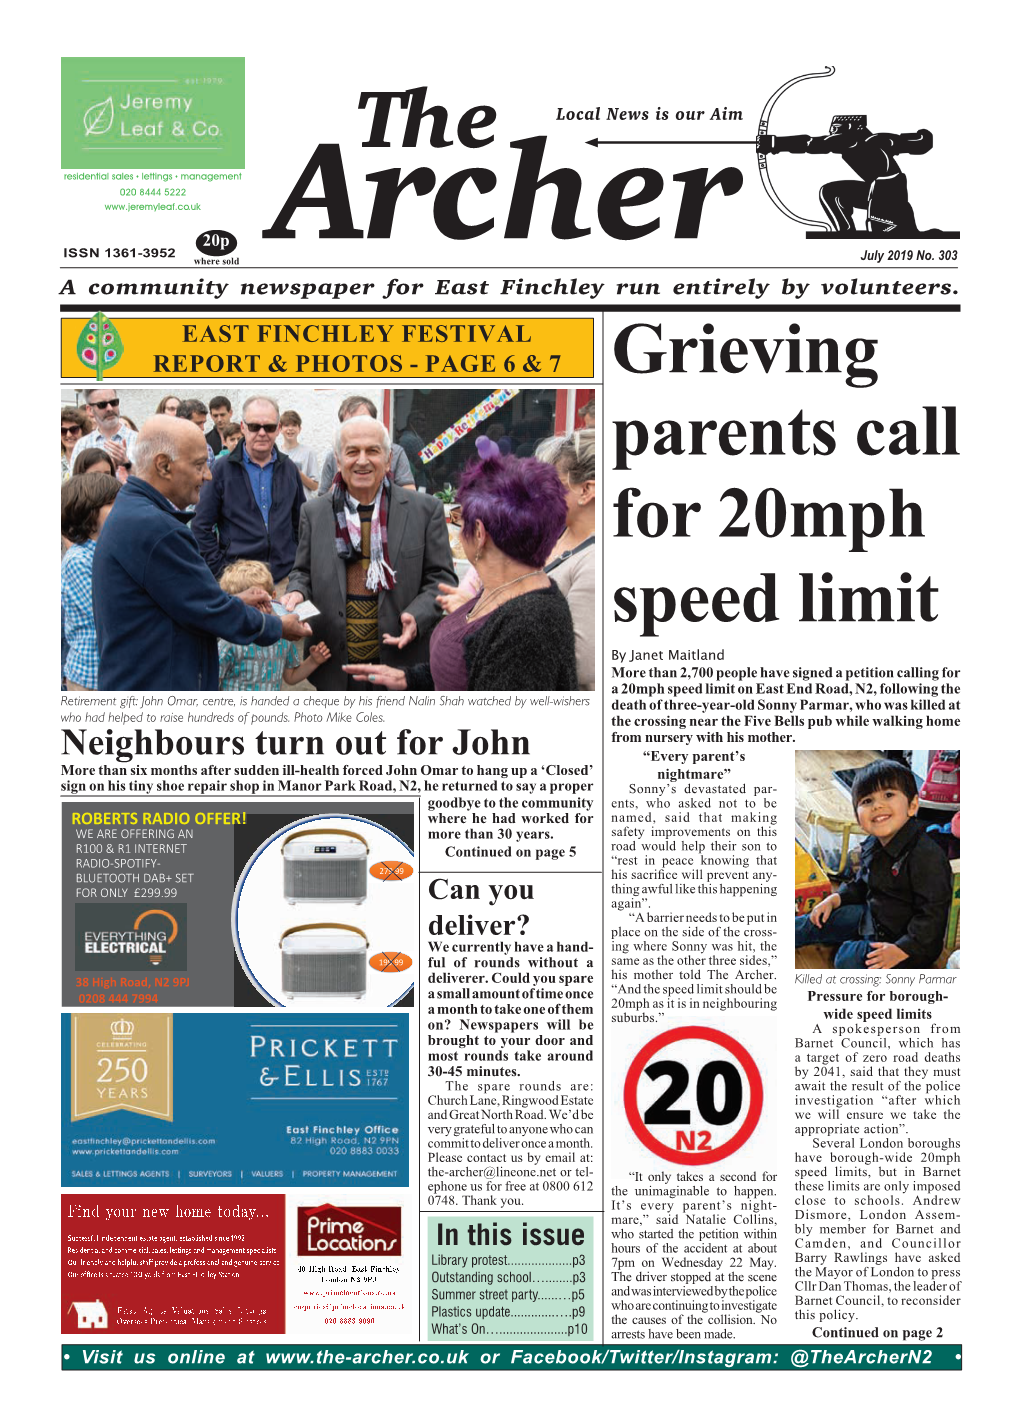 Grieving Parents Call for 20Mph Speed Limit